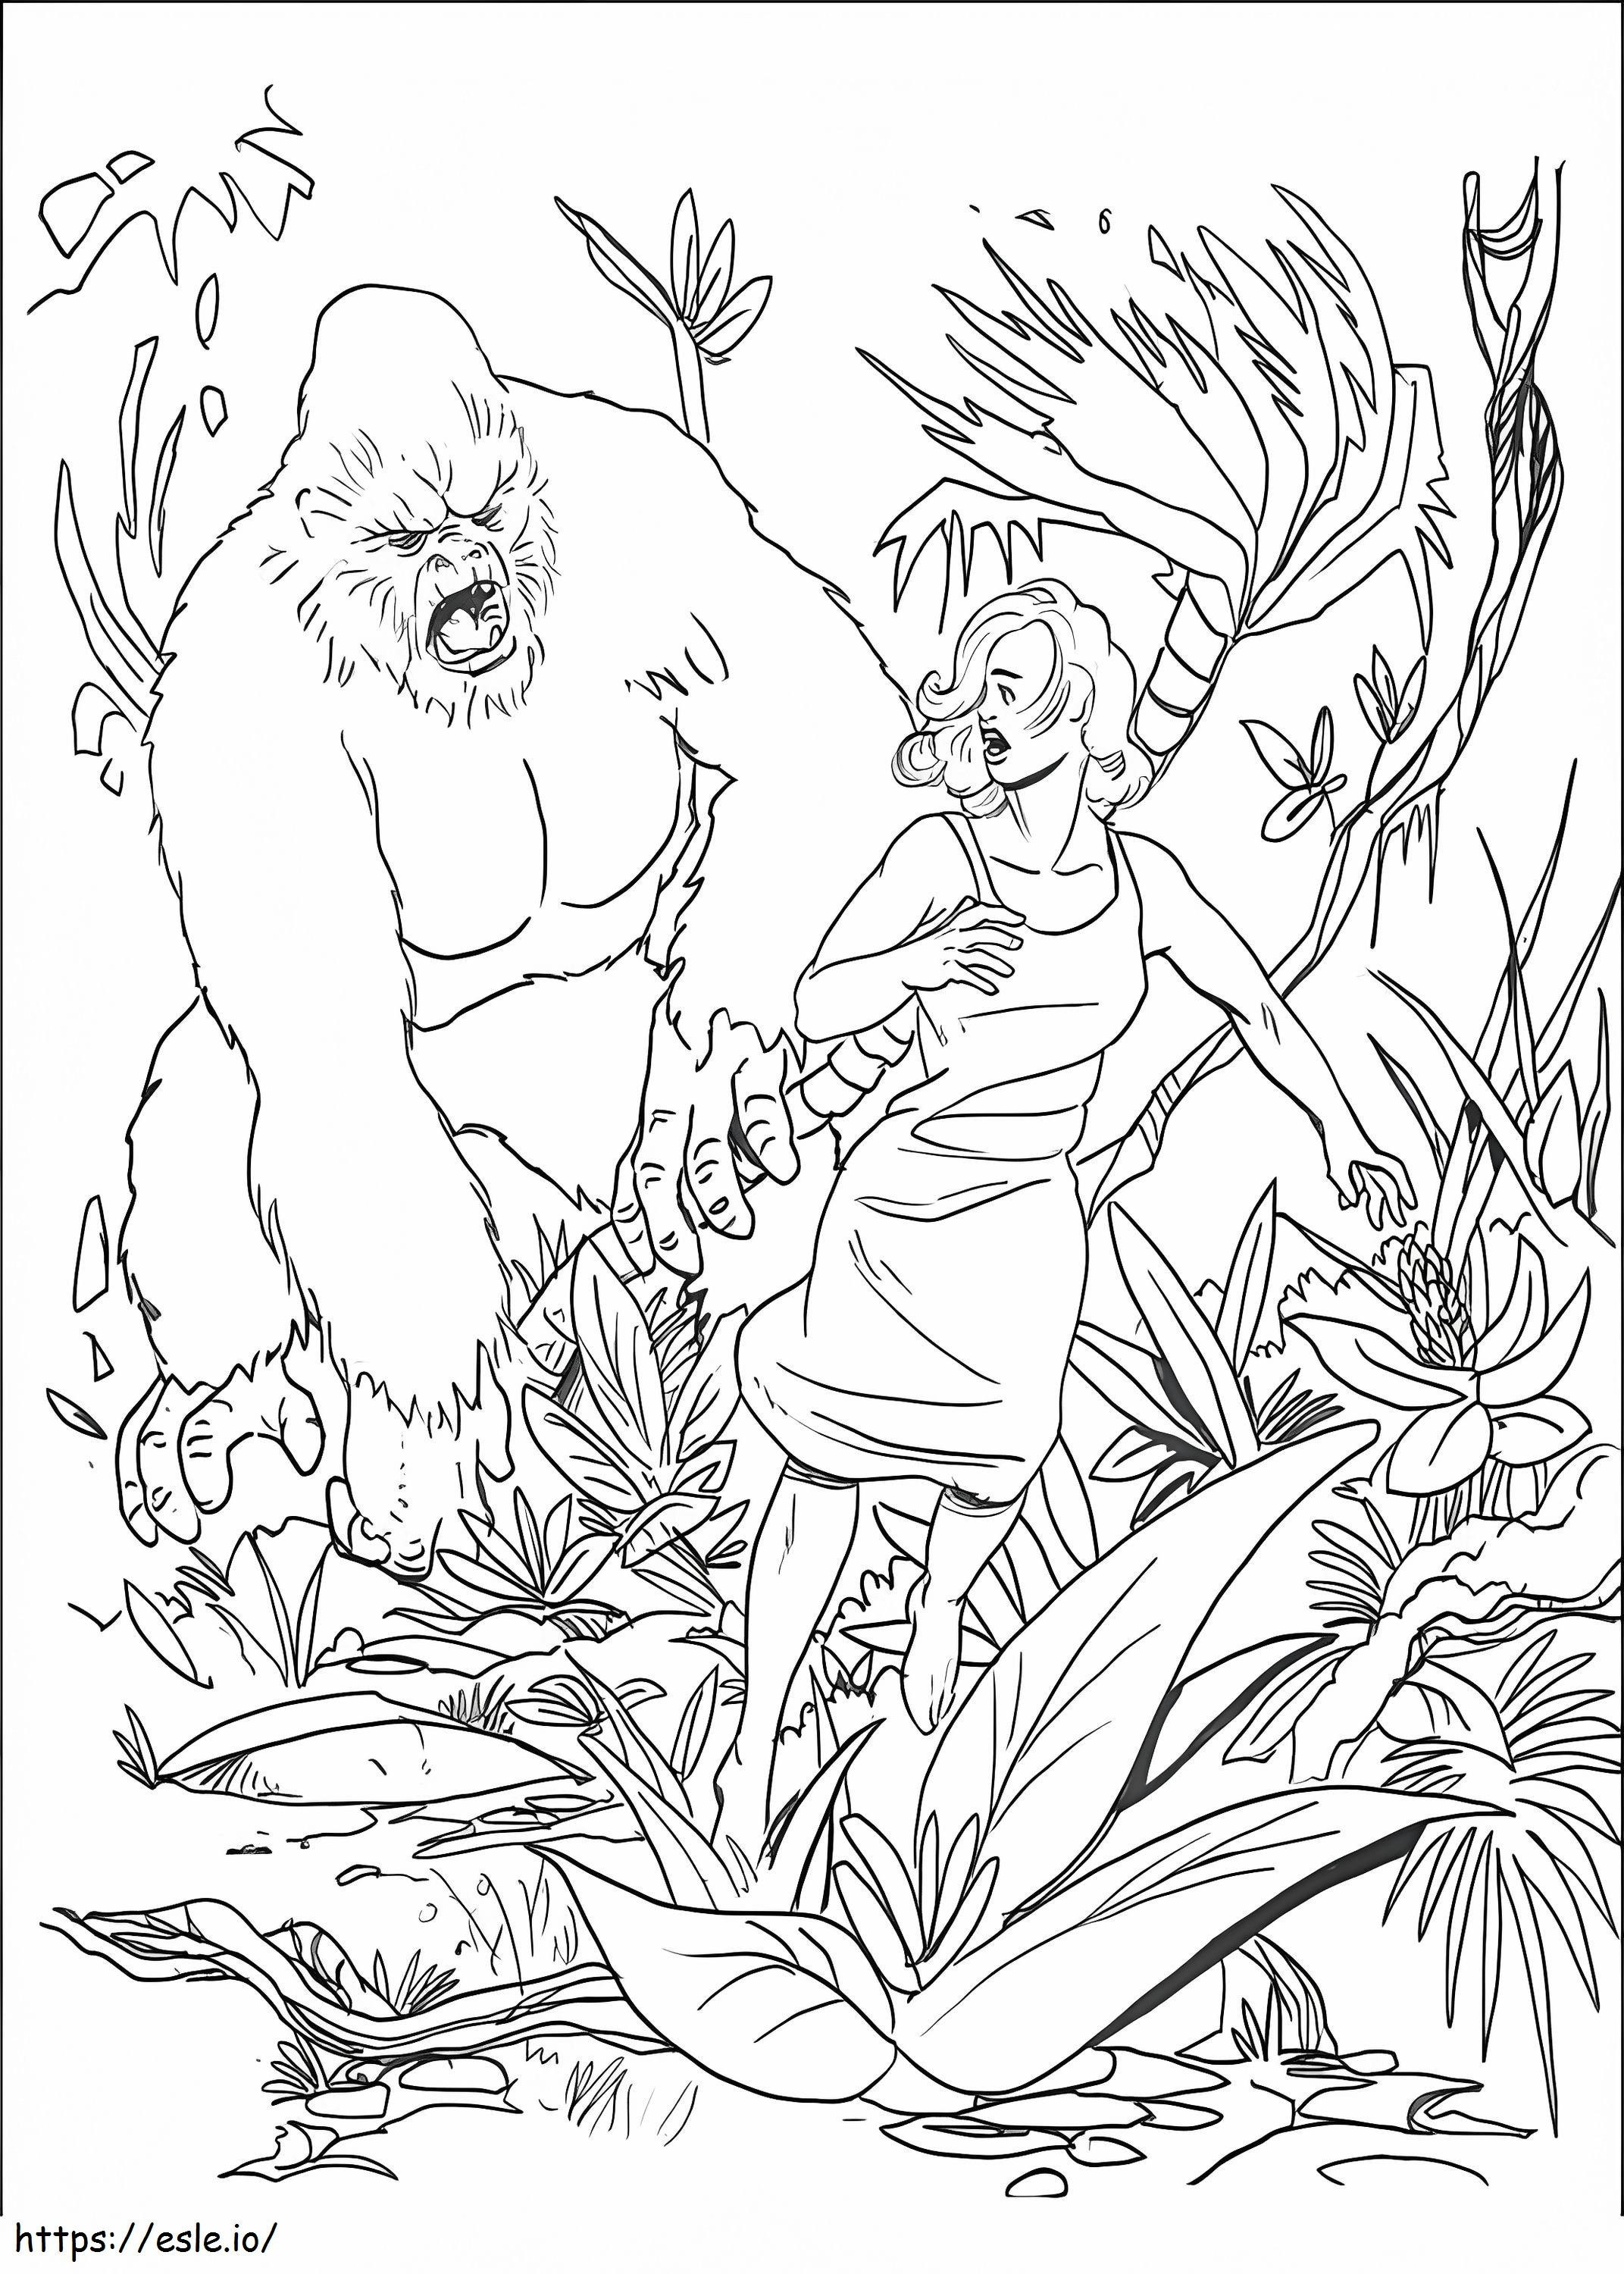 King Kong Chases The Running Girl coloring page